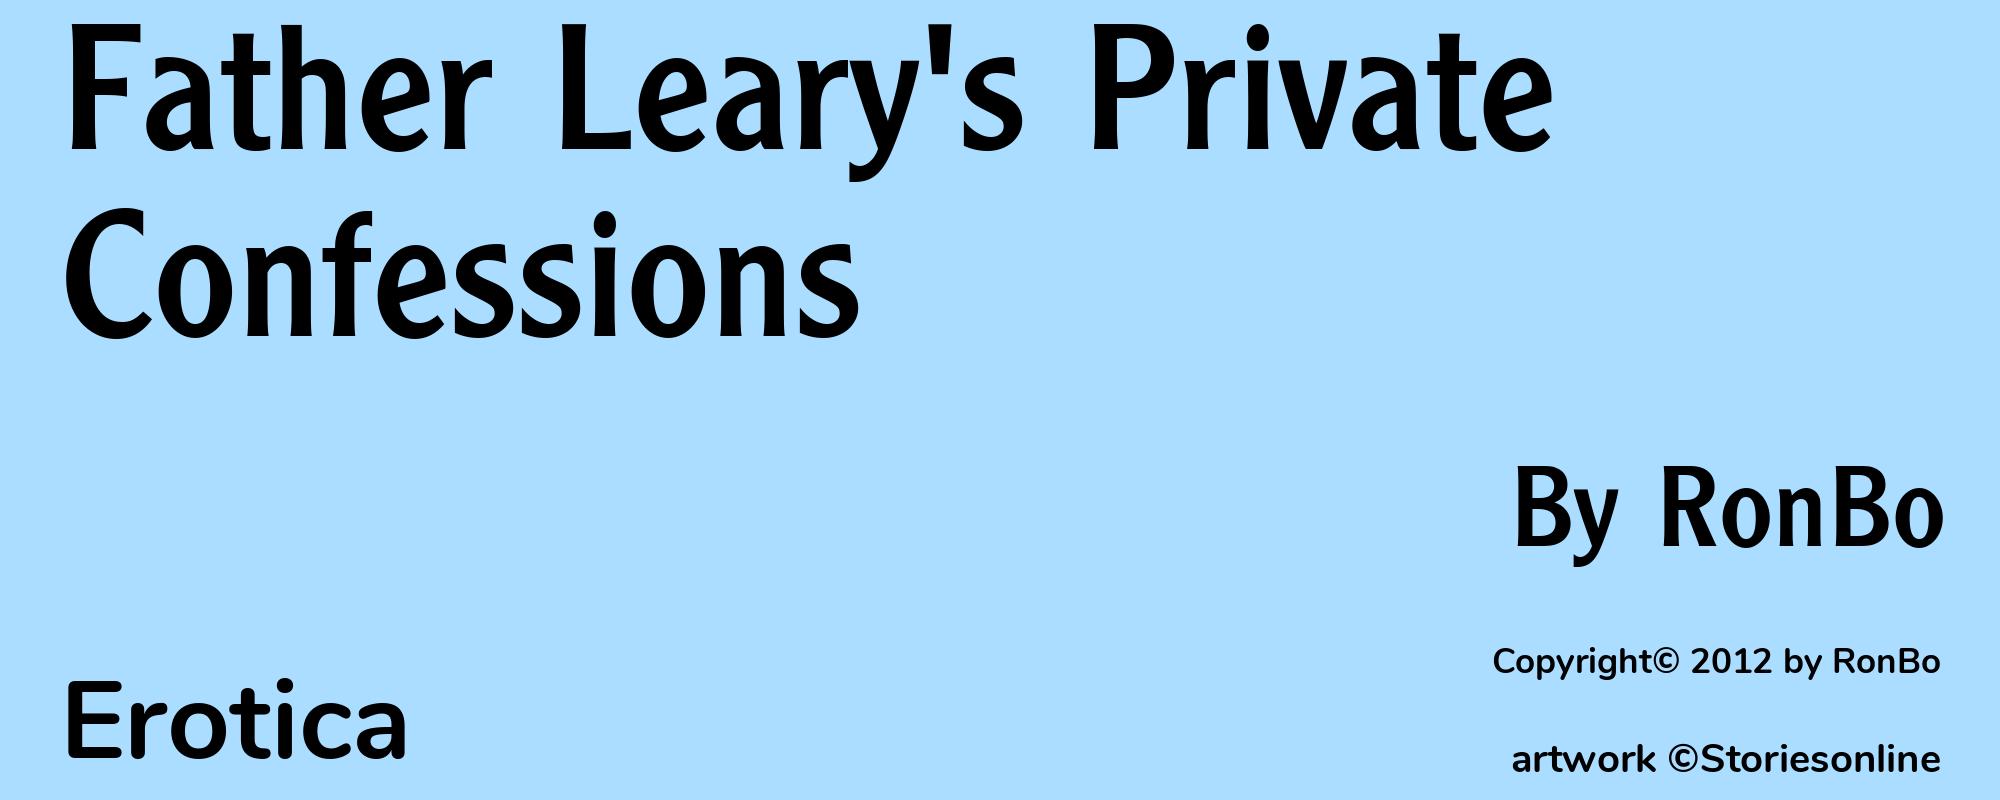 Father Leary's Private Confessions - Cover